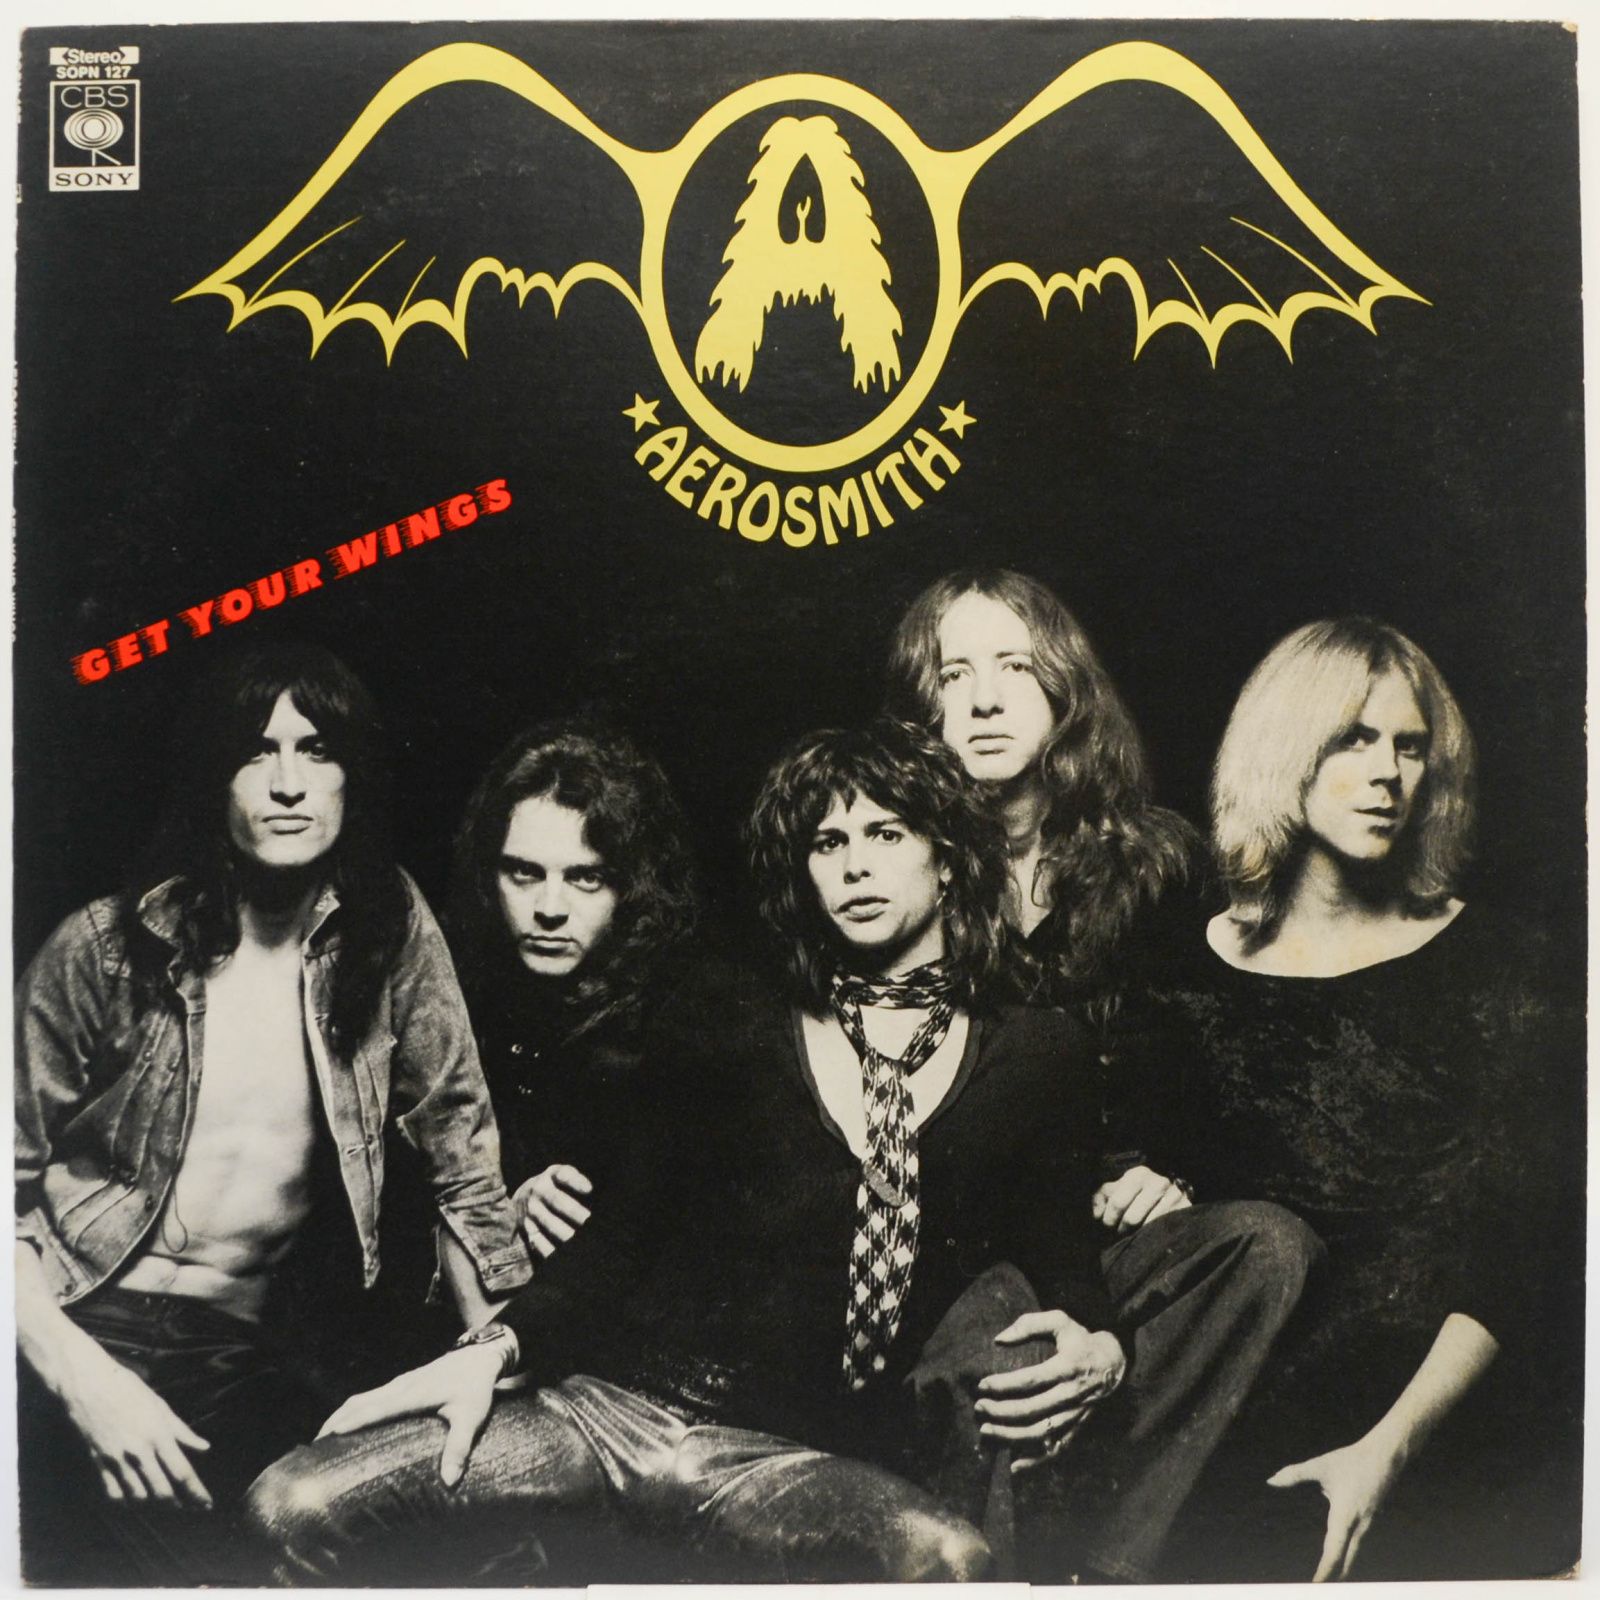 Aerosmith — Get Your Wings, 1975